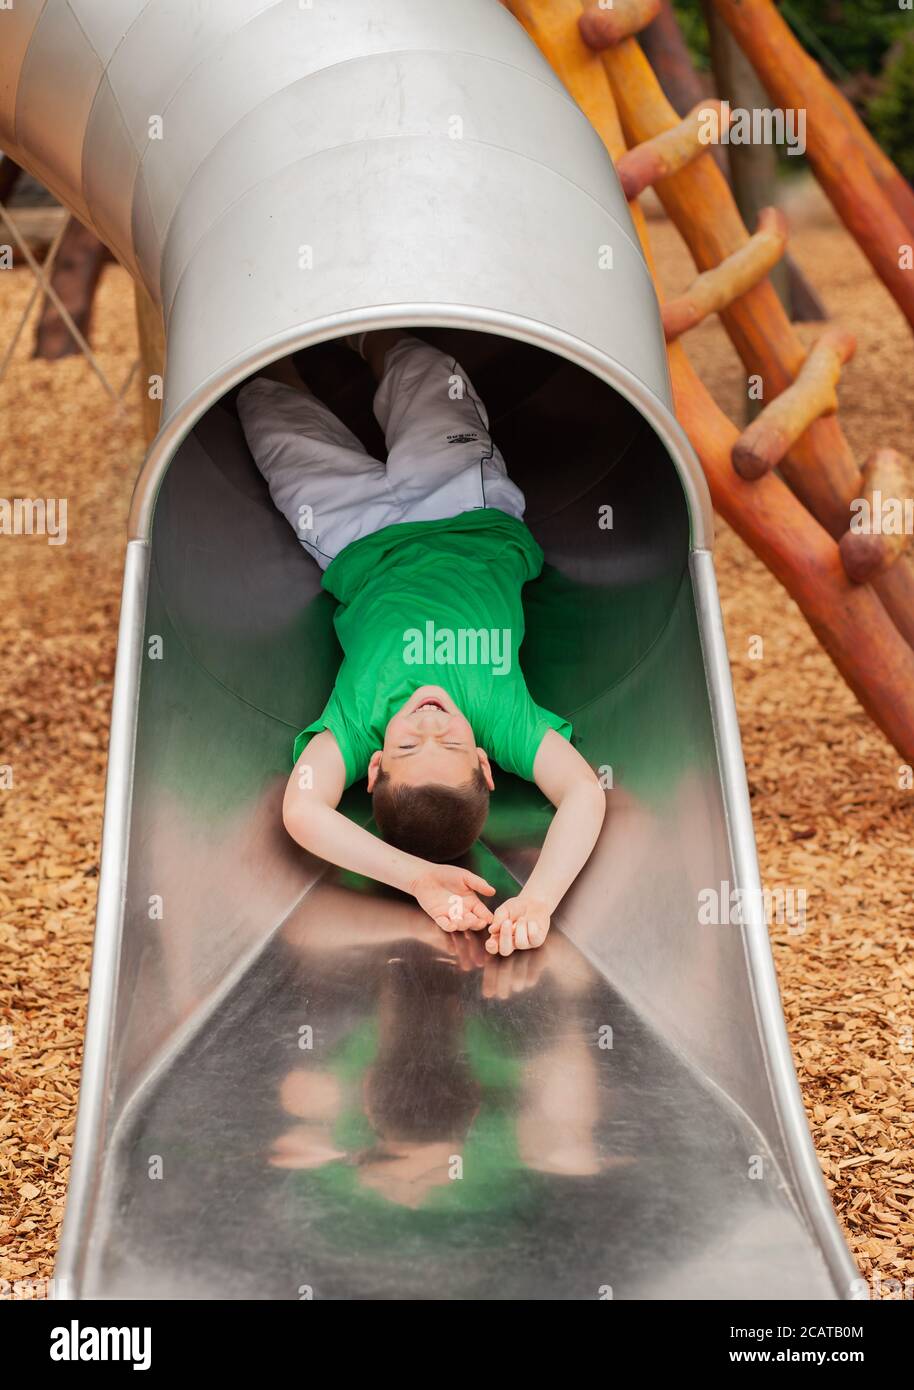 Young Boy Playing On a Slide in a Park Stock Photo